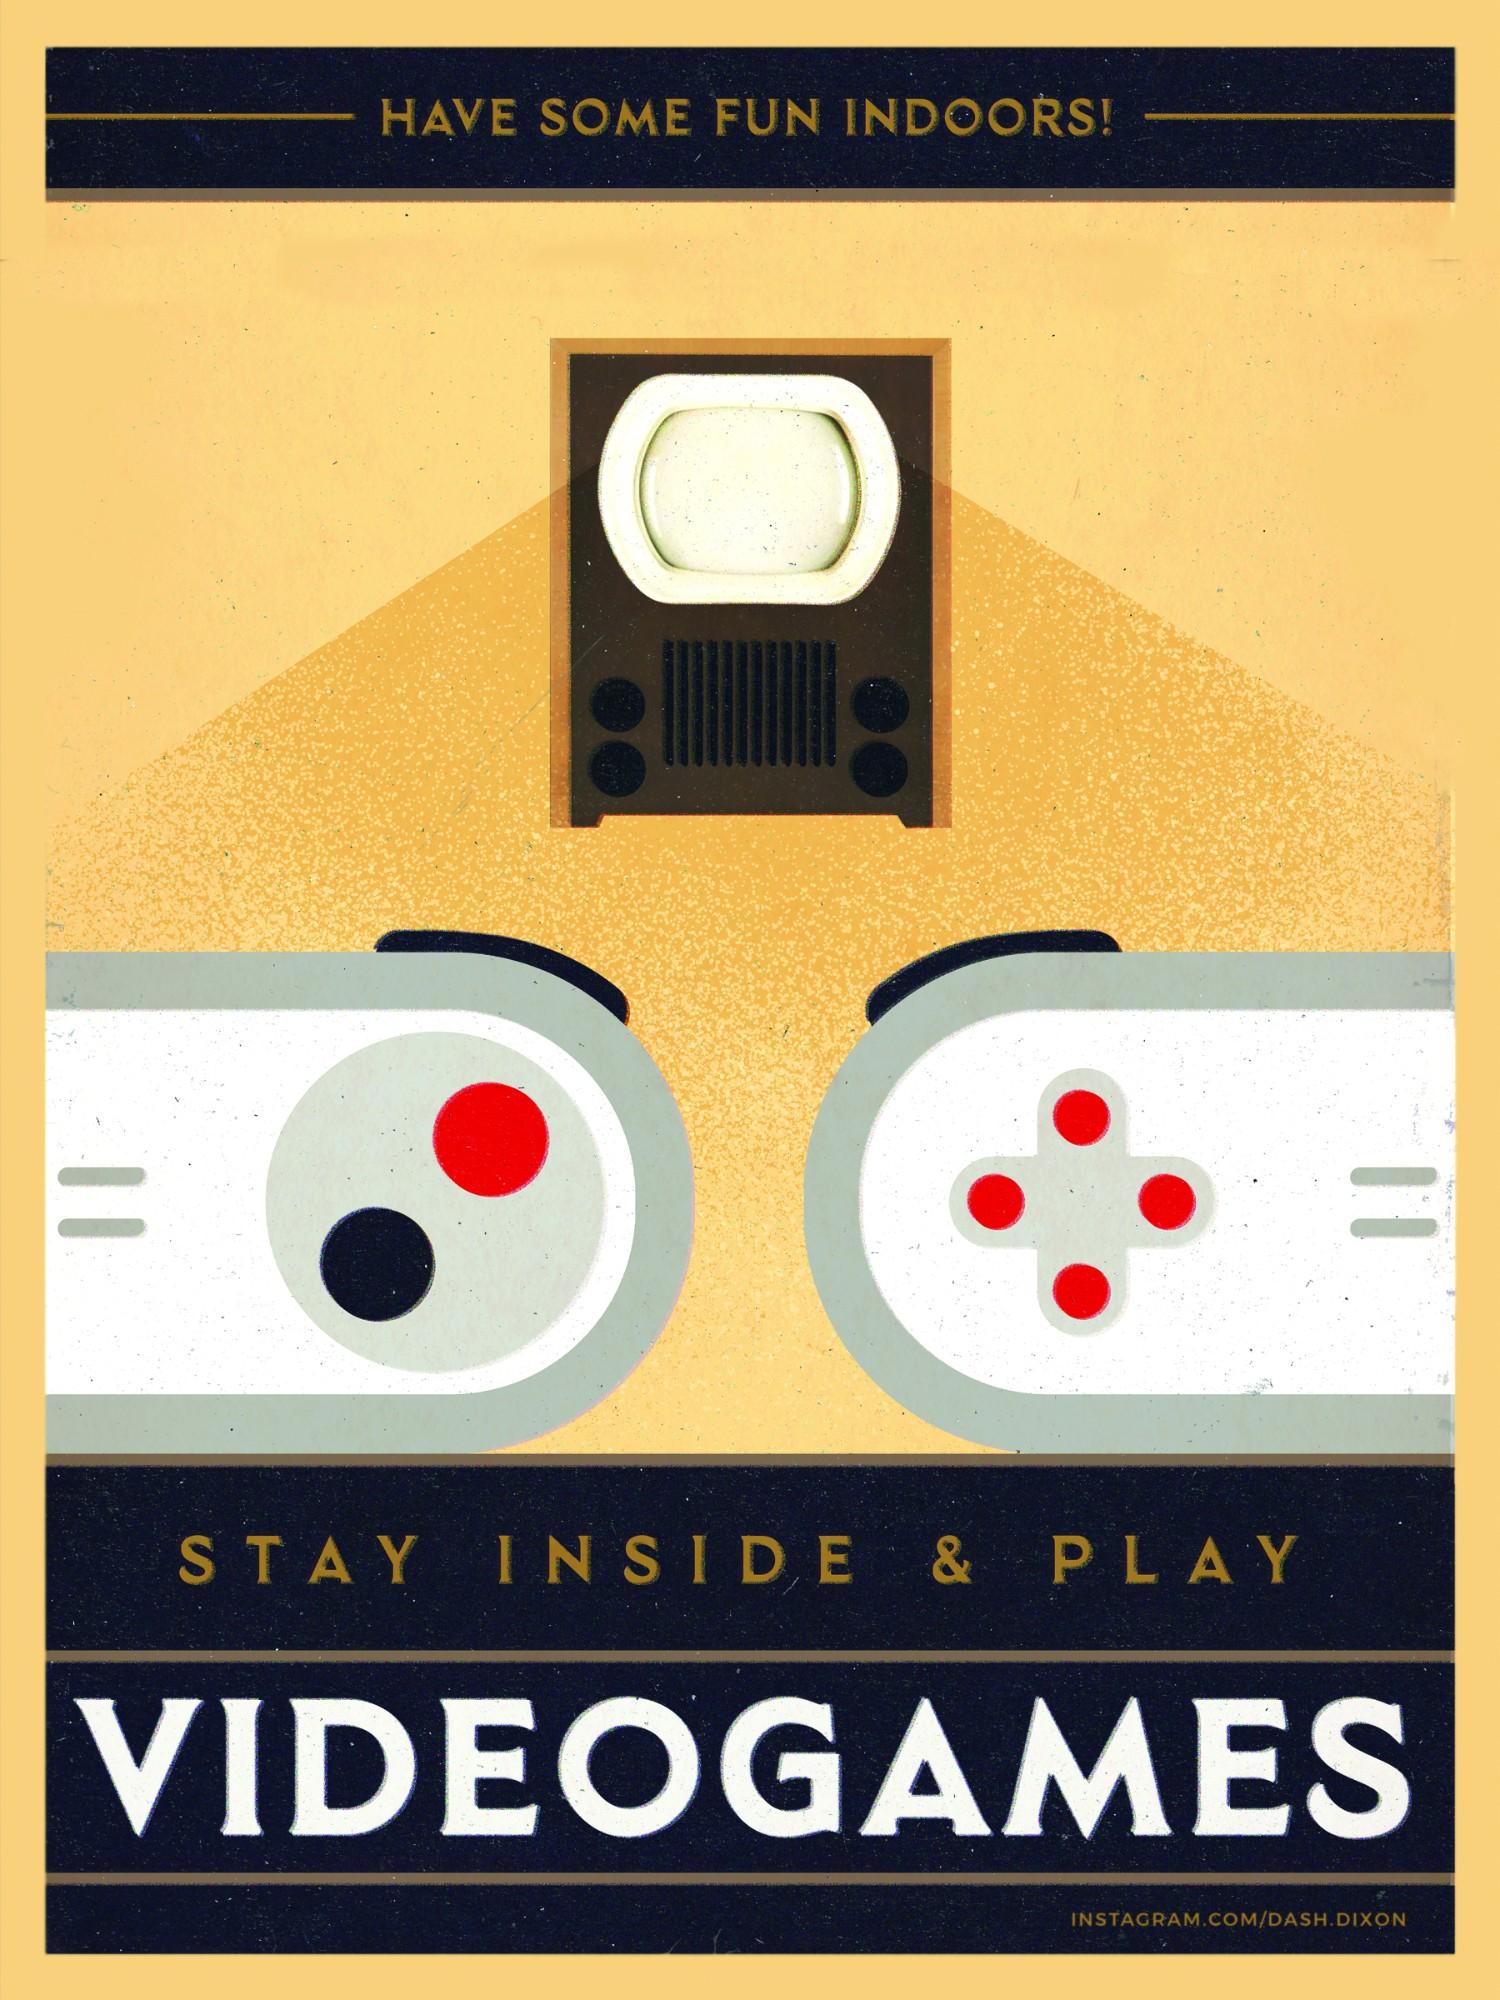 covid-19 propaganda poster that reads "stay inside and play video games" with the images of 2 nintendo remote controls and a tv